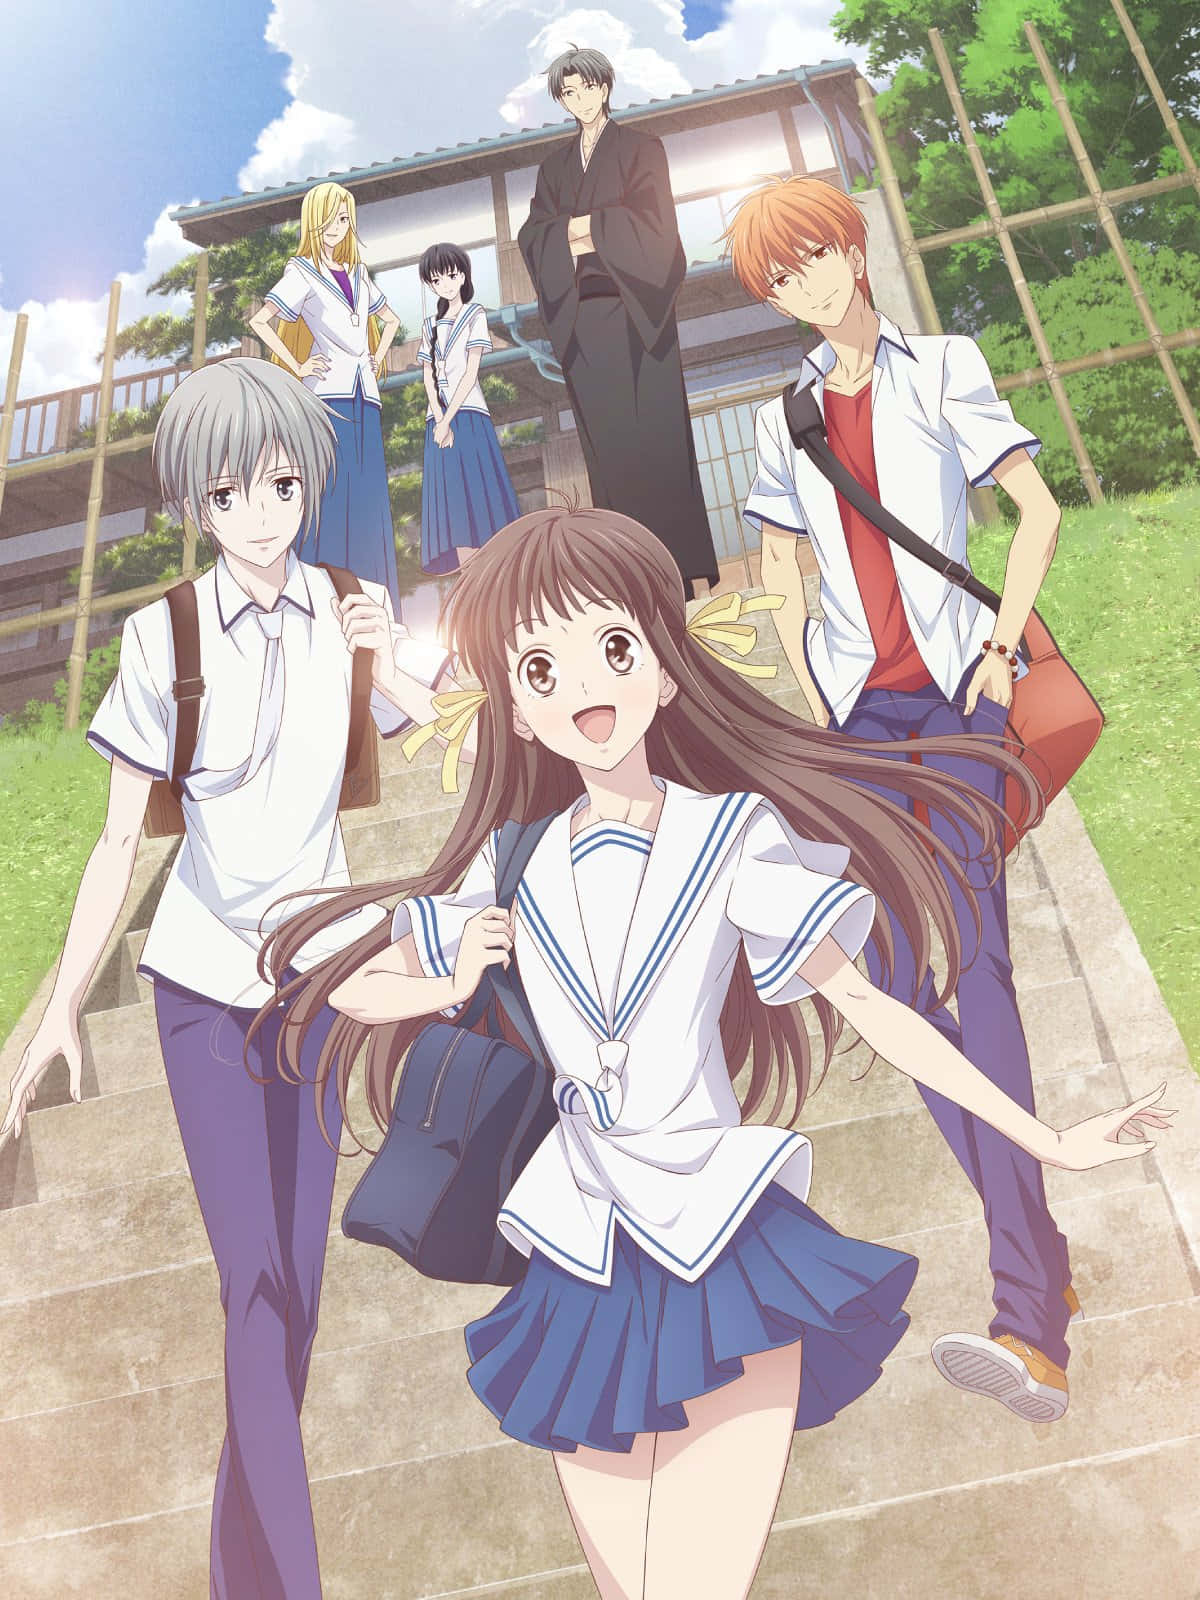 Keep up with all the drama in the Fruits Basket anime.